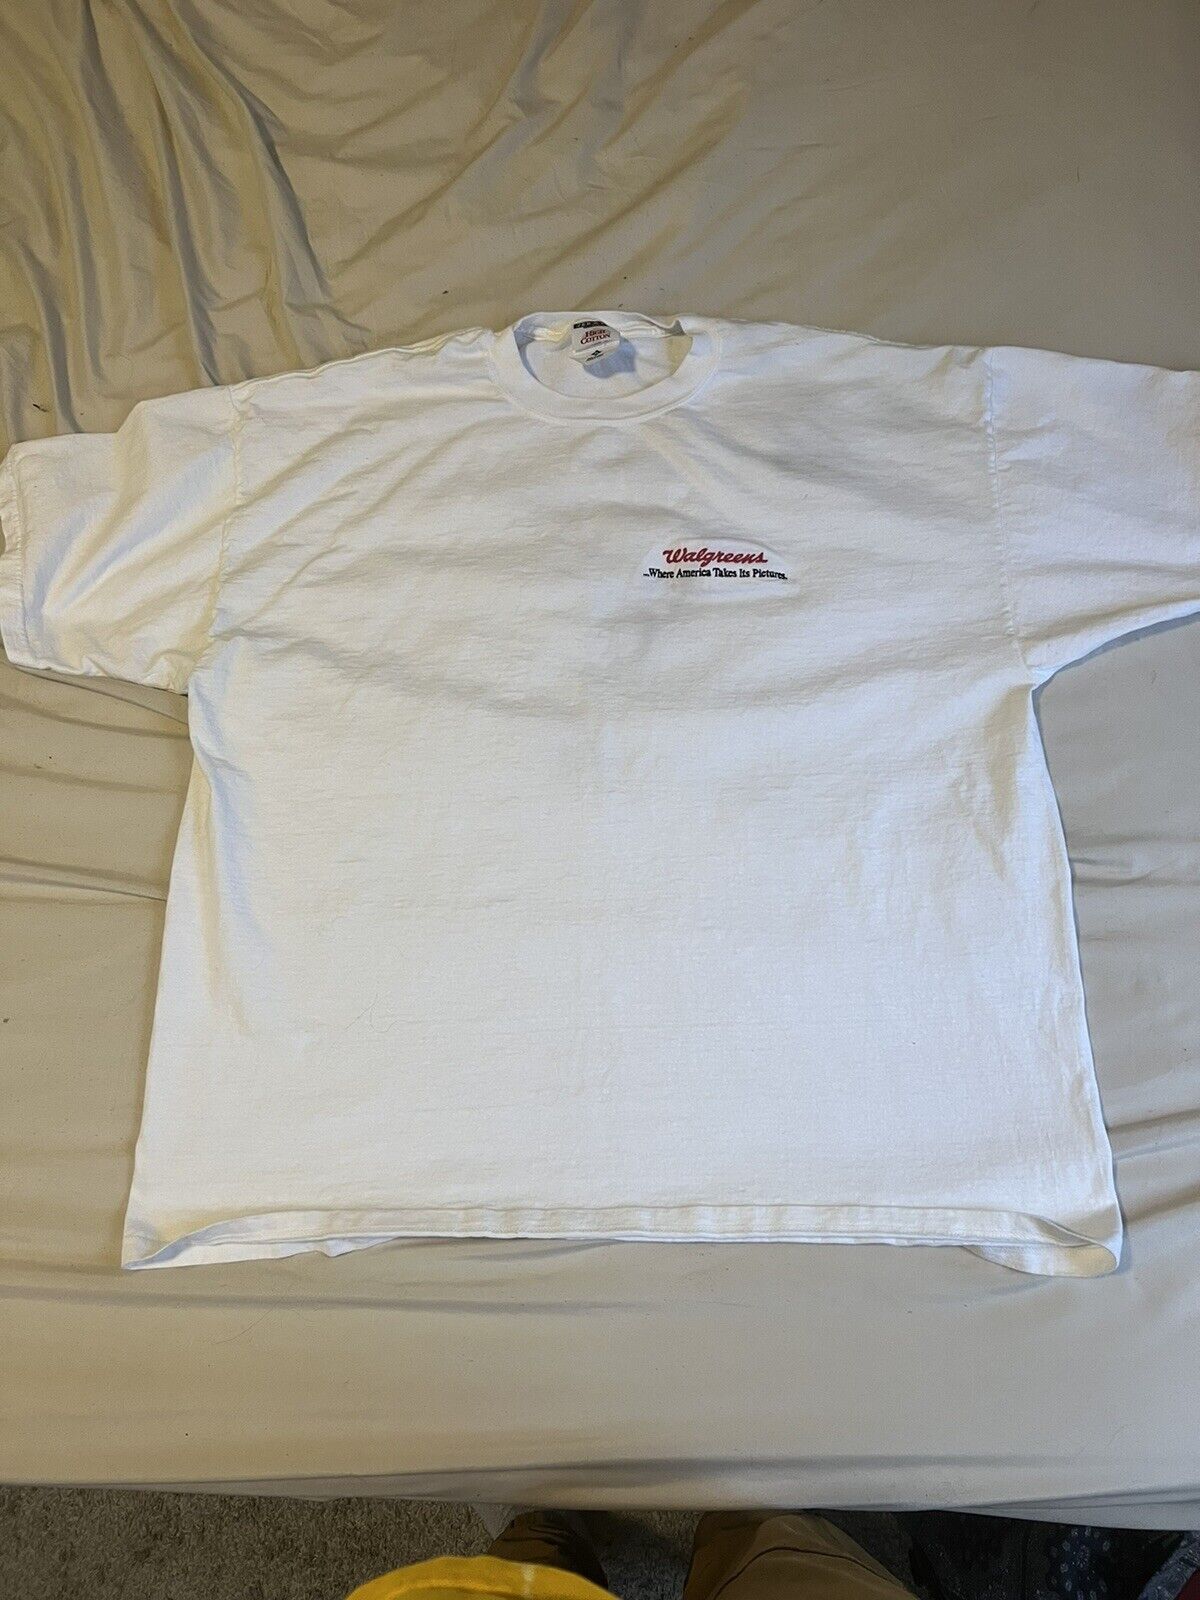 Vintage/Rare Walgreens Shirt “Where America Takes Pictures”